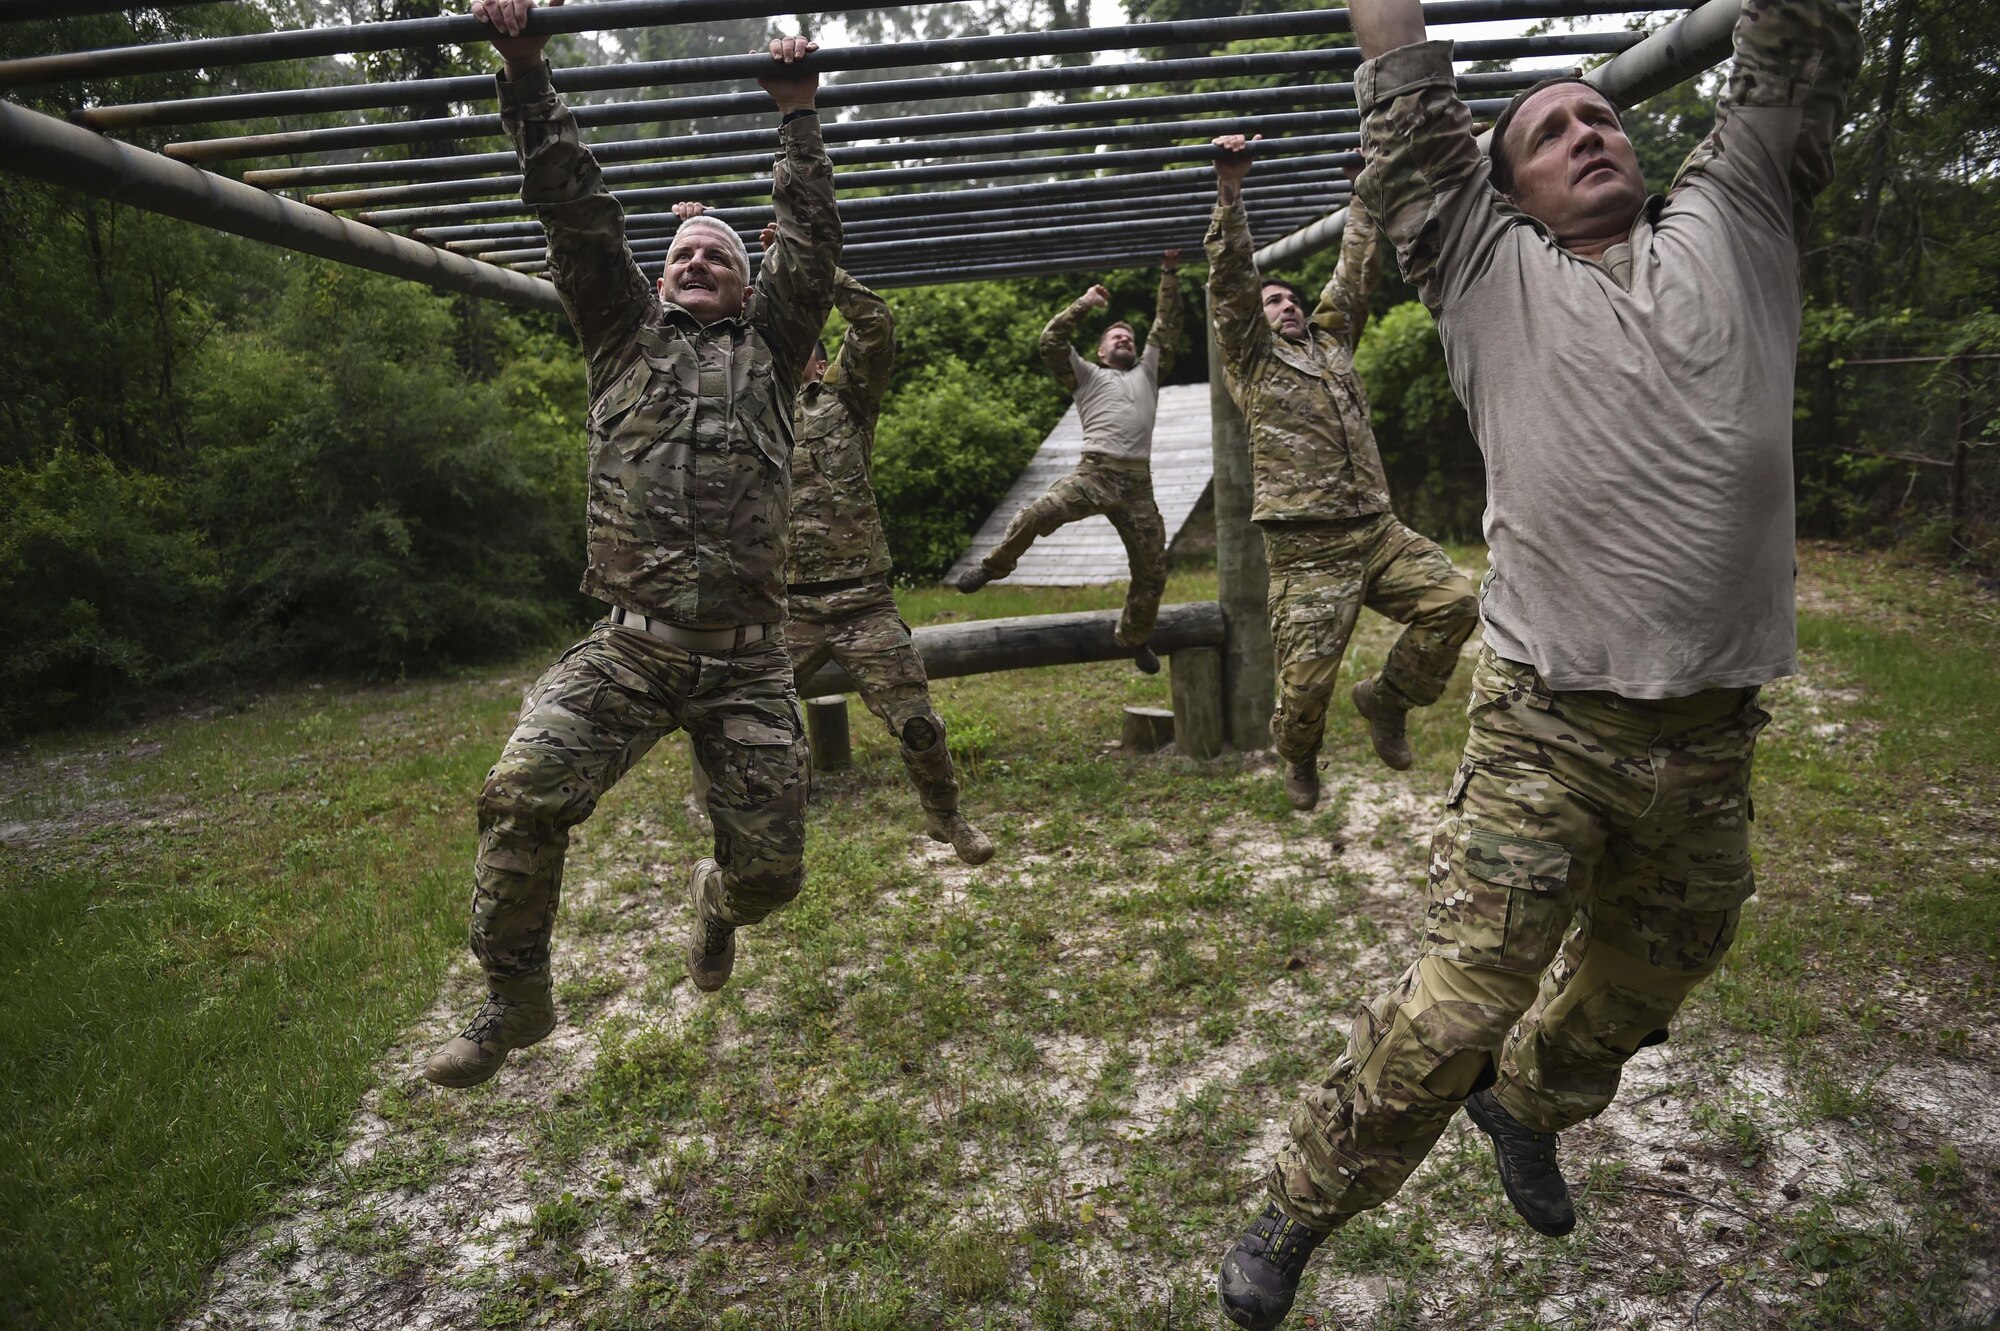 Monster Mash Team 4 completes a monkey-bar obstacle during a Monster Mash at Hurlburt Field, Fla., May 12, 2016. Monster Mash is a long-standing Special Tactics training tradition, consisting of an obstacle course where special operators complete timed scenarios at different stations of core mission training. The event was held in honor of Chief Master Sgt. Bruce W. Dixon, the command chief of the 24th Special Operations Wing, who is retiring after a 30-year career as a combat controller. (U.S. Air Force photo by Senior Airman Ryan Conroy) 